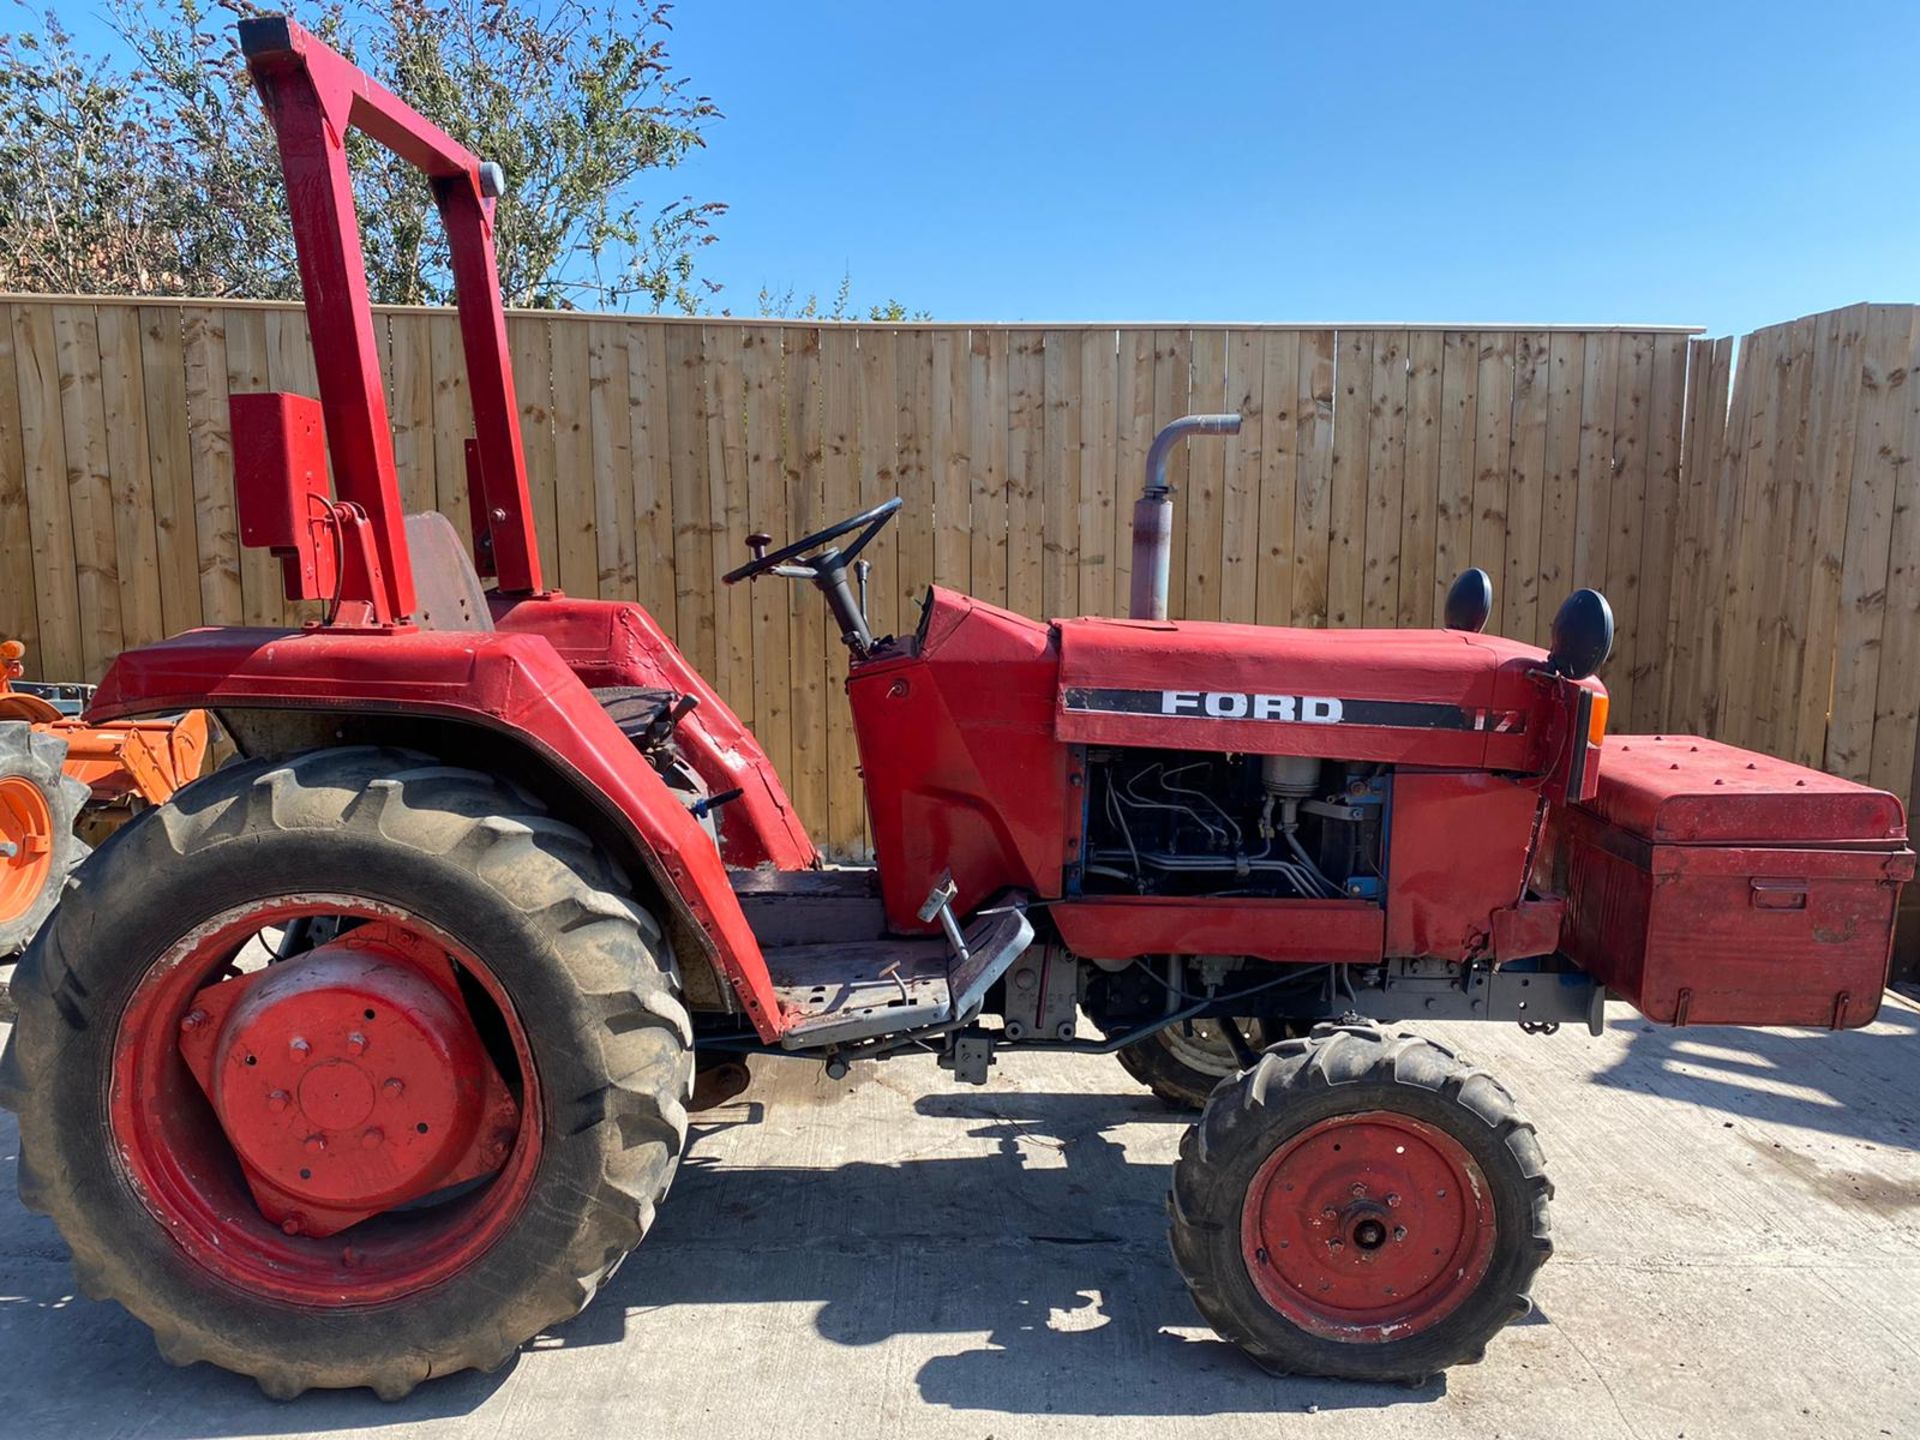 FORD 1720 COMPACT DIESEL TRACTOR LOCATION CO DURHAM